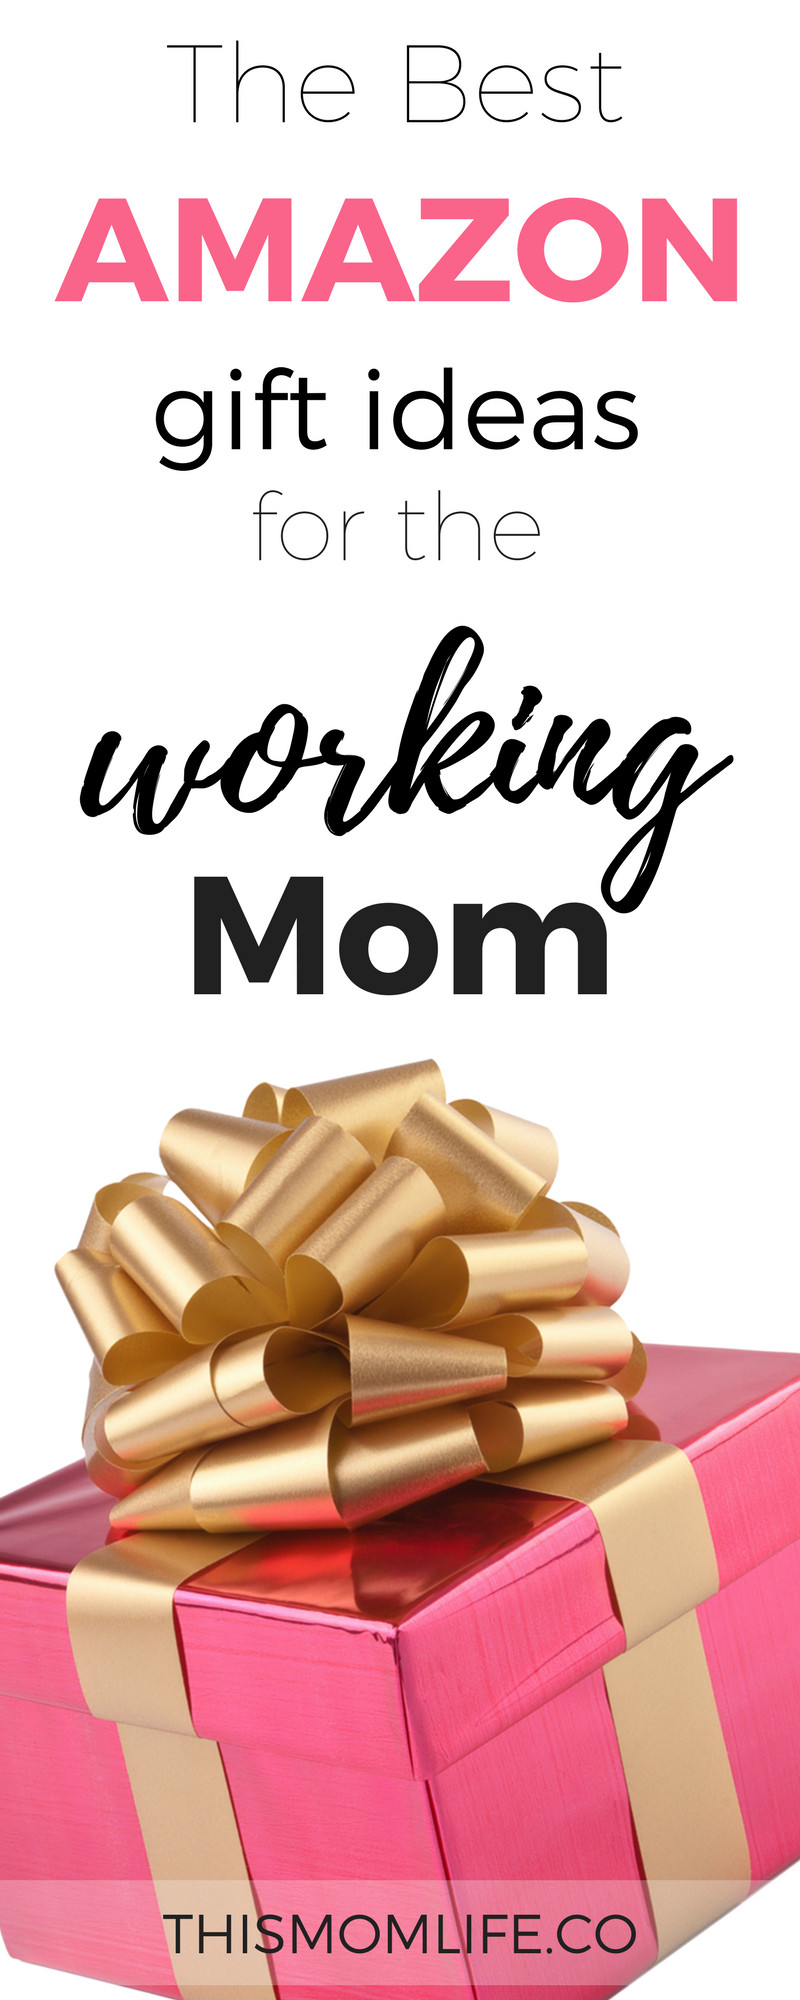 Best Gift Ideas For Mom
 The Best Gift Ideas for Busy Moms This Mom Life